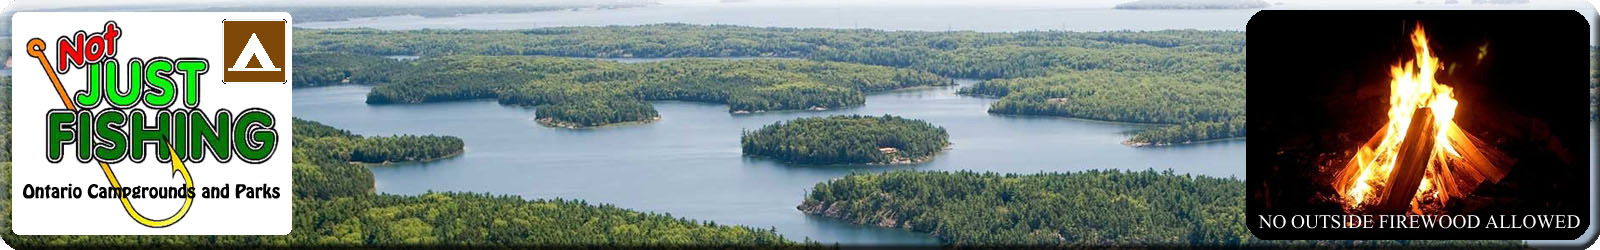 Northeastern Ontario Campgrounds, Trailer Parks, RV Resorts and Lodges